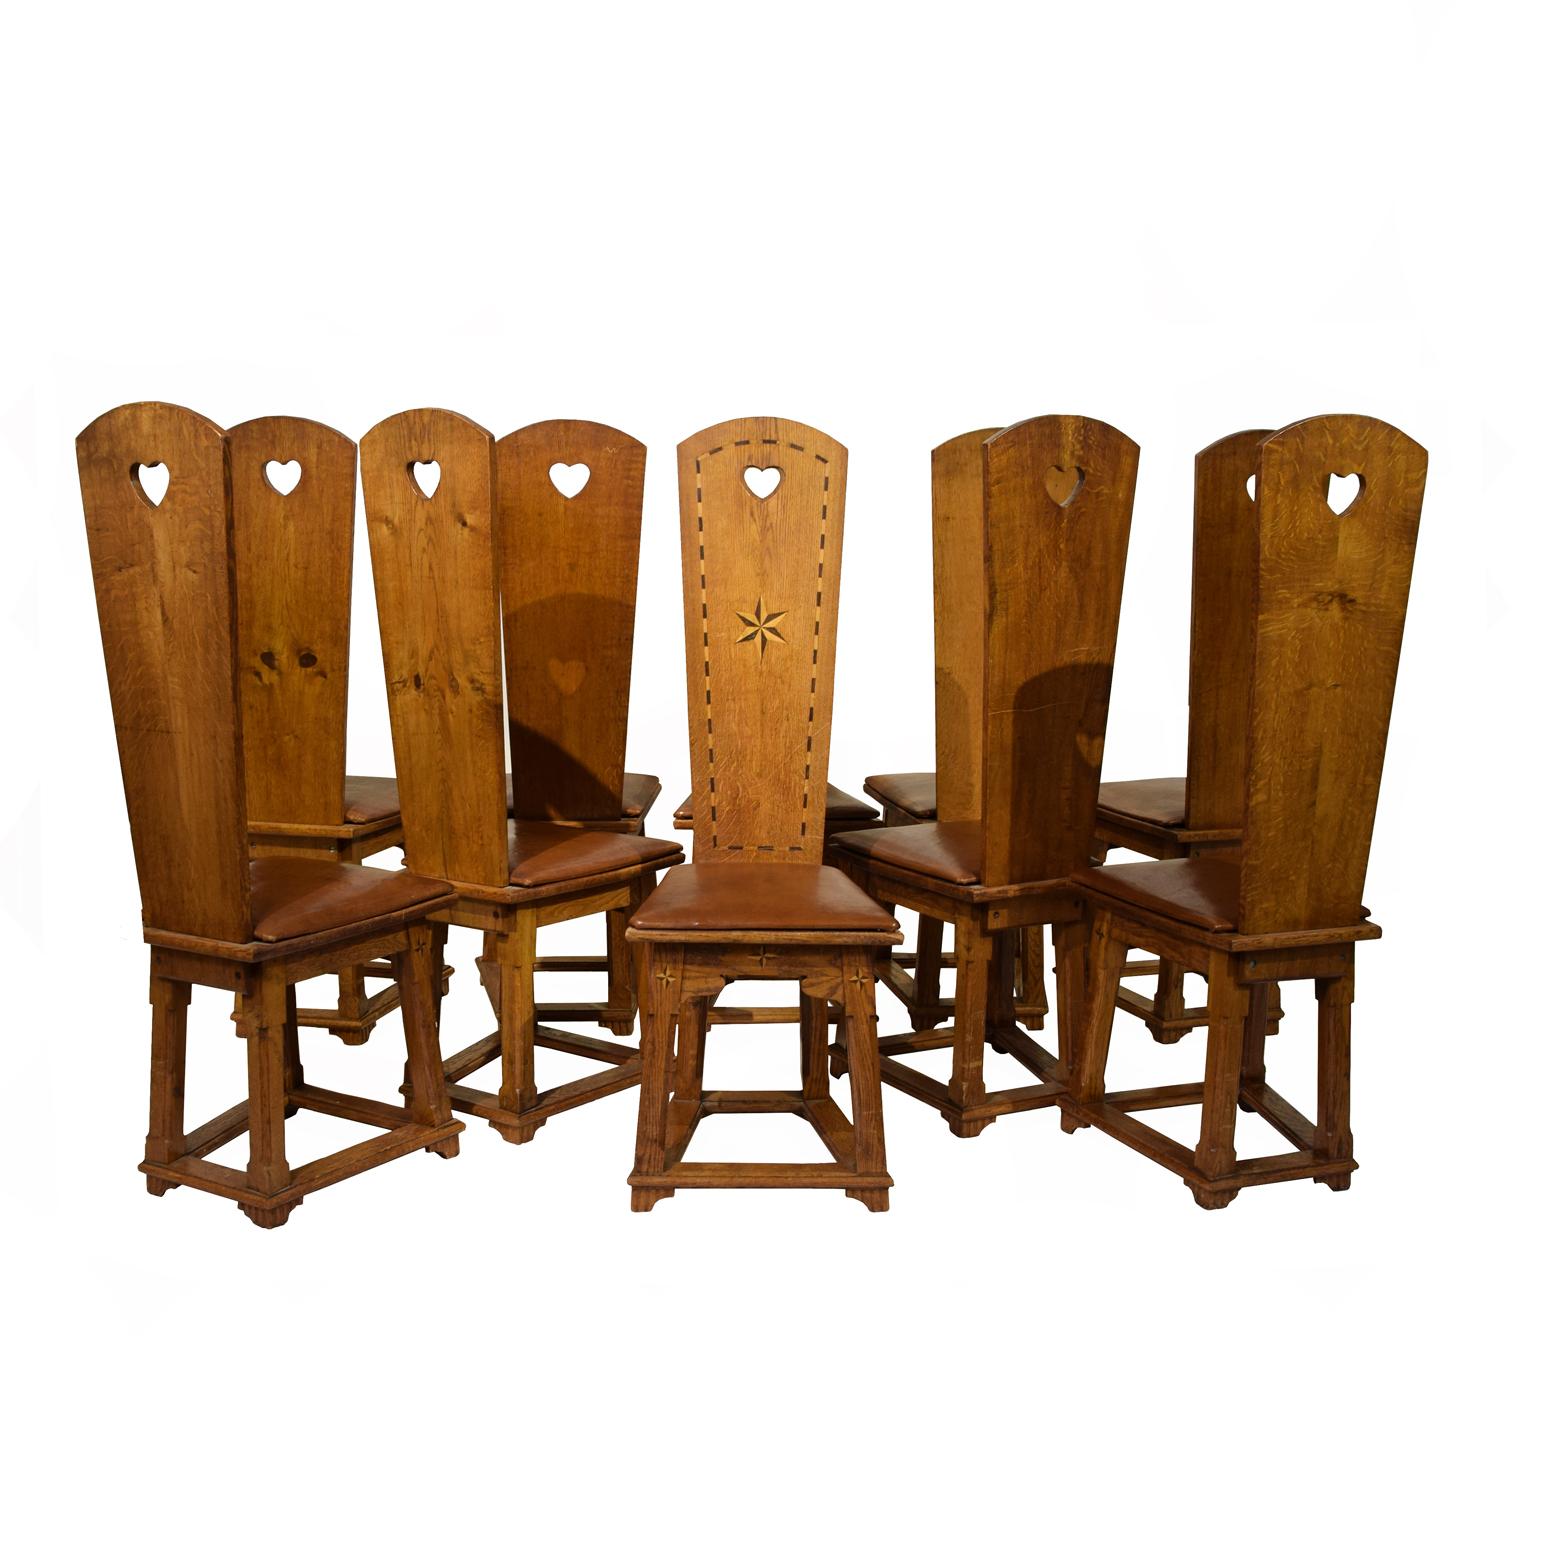 Arts and Crafts Rare 10 Arts & Craft Chairs from Villa Foresta Lidingö Sweden 1908-1910 For Sale